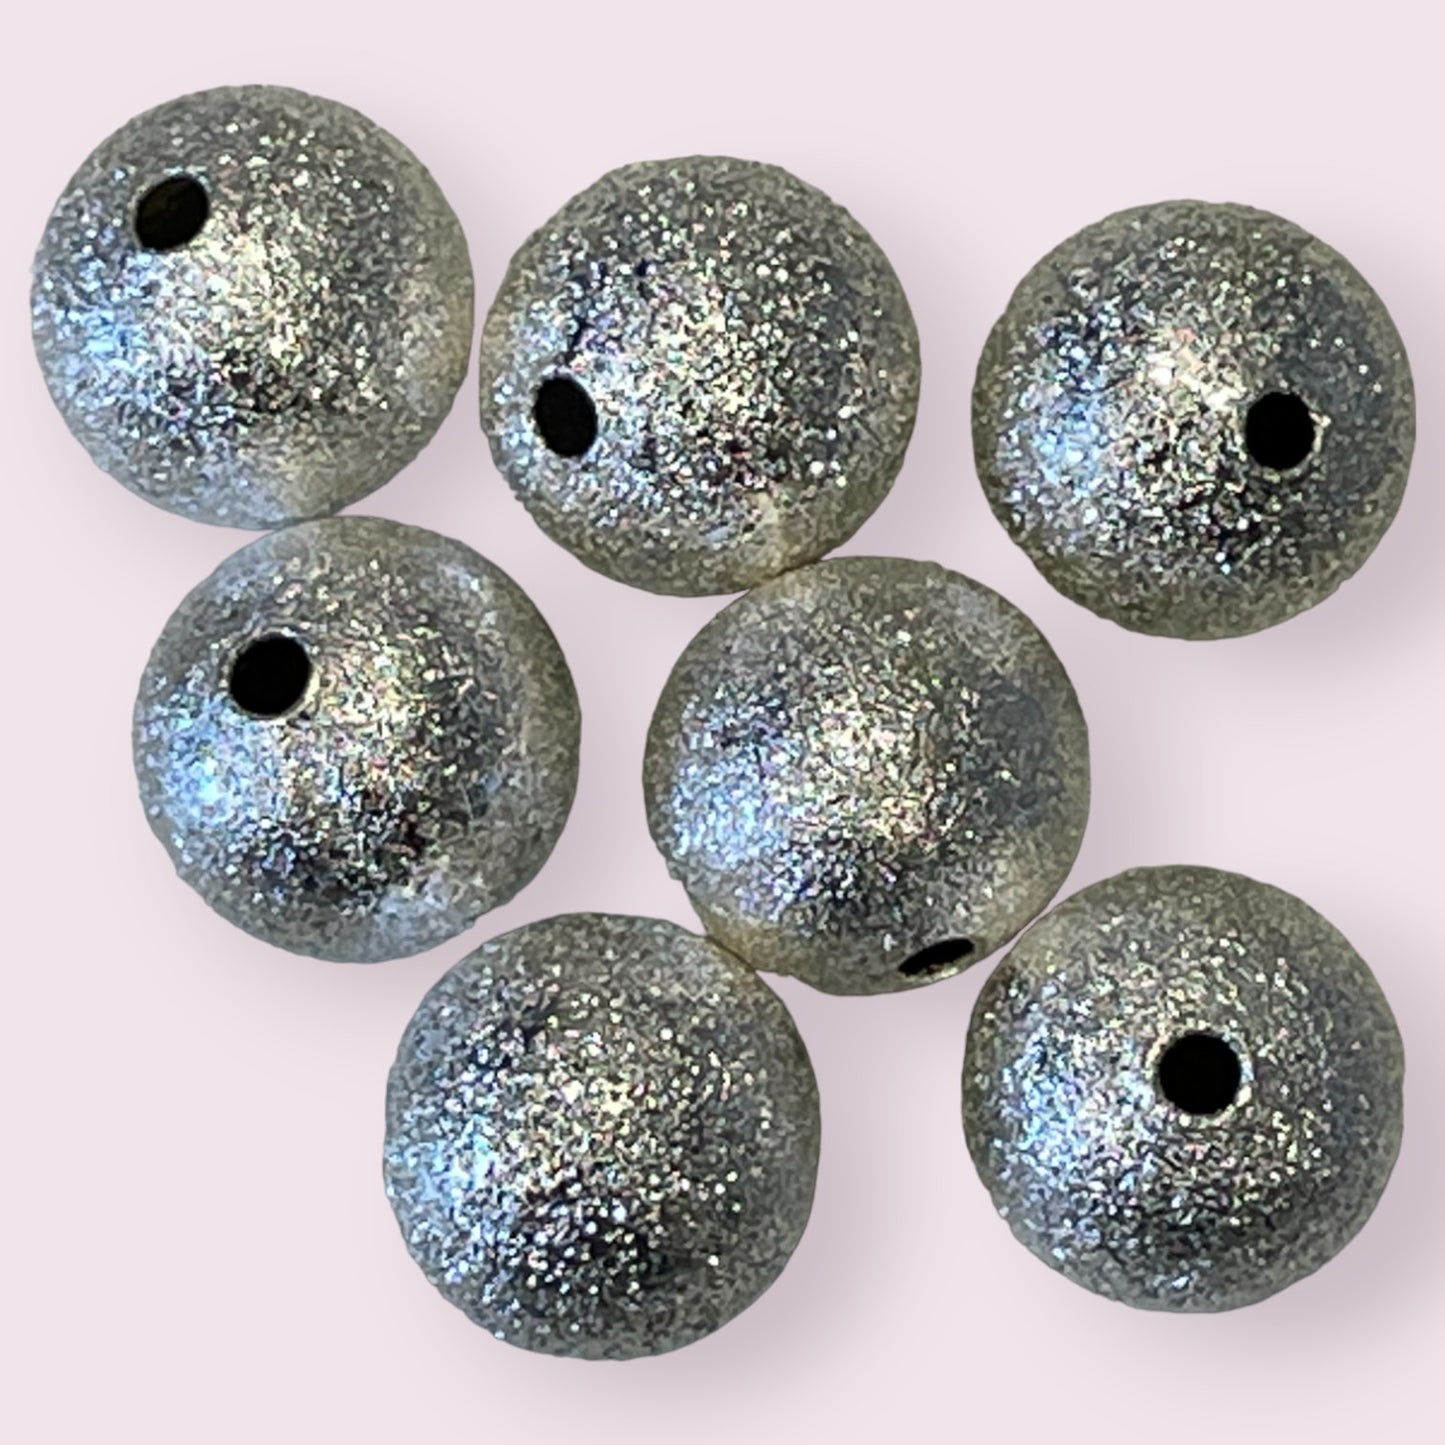 Silver Stardust Beads - copper base - 6mm, 8mm and 10mm - 20 pack